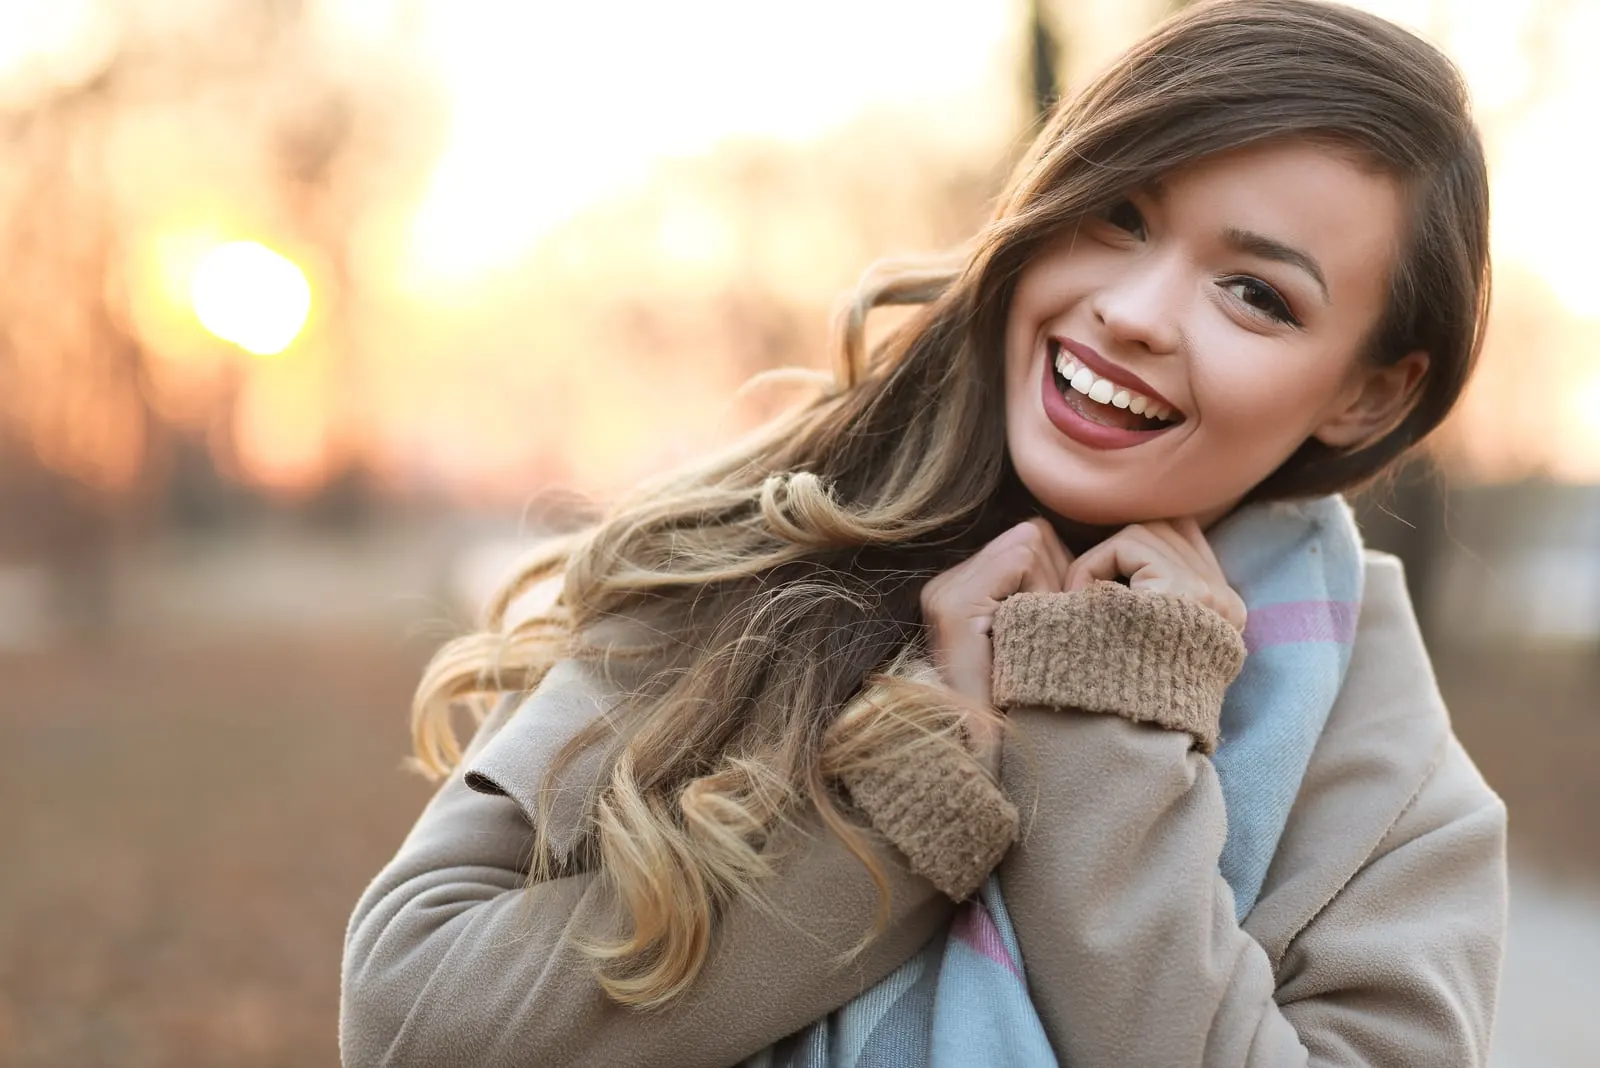 happy young woman smiling